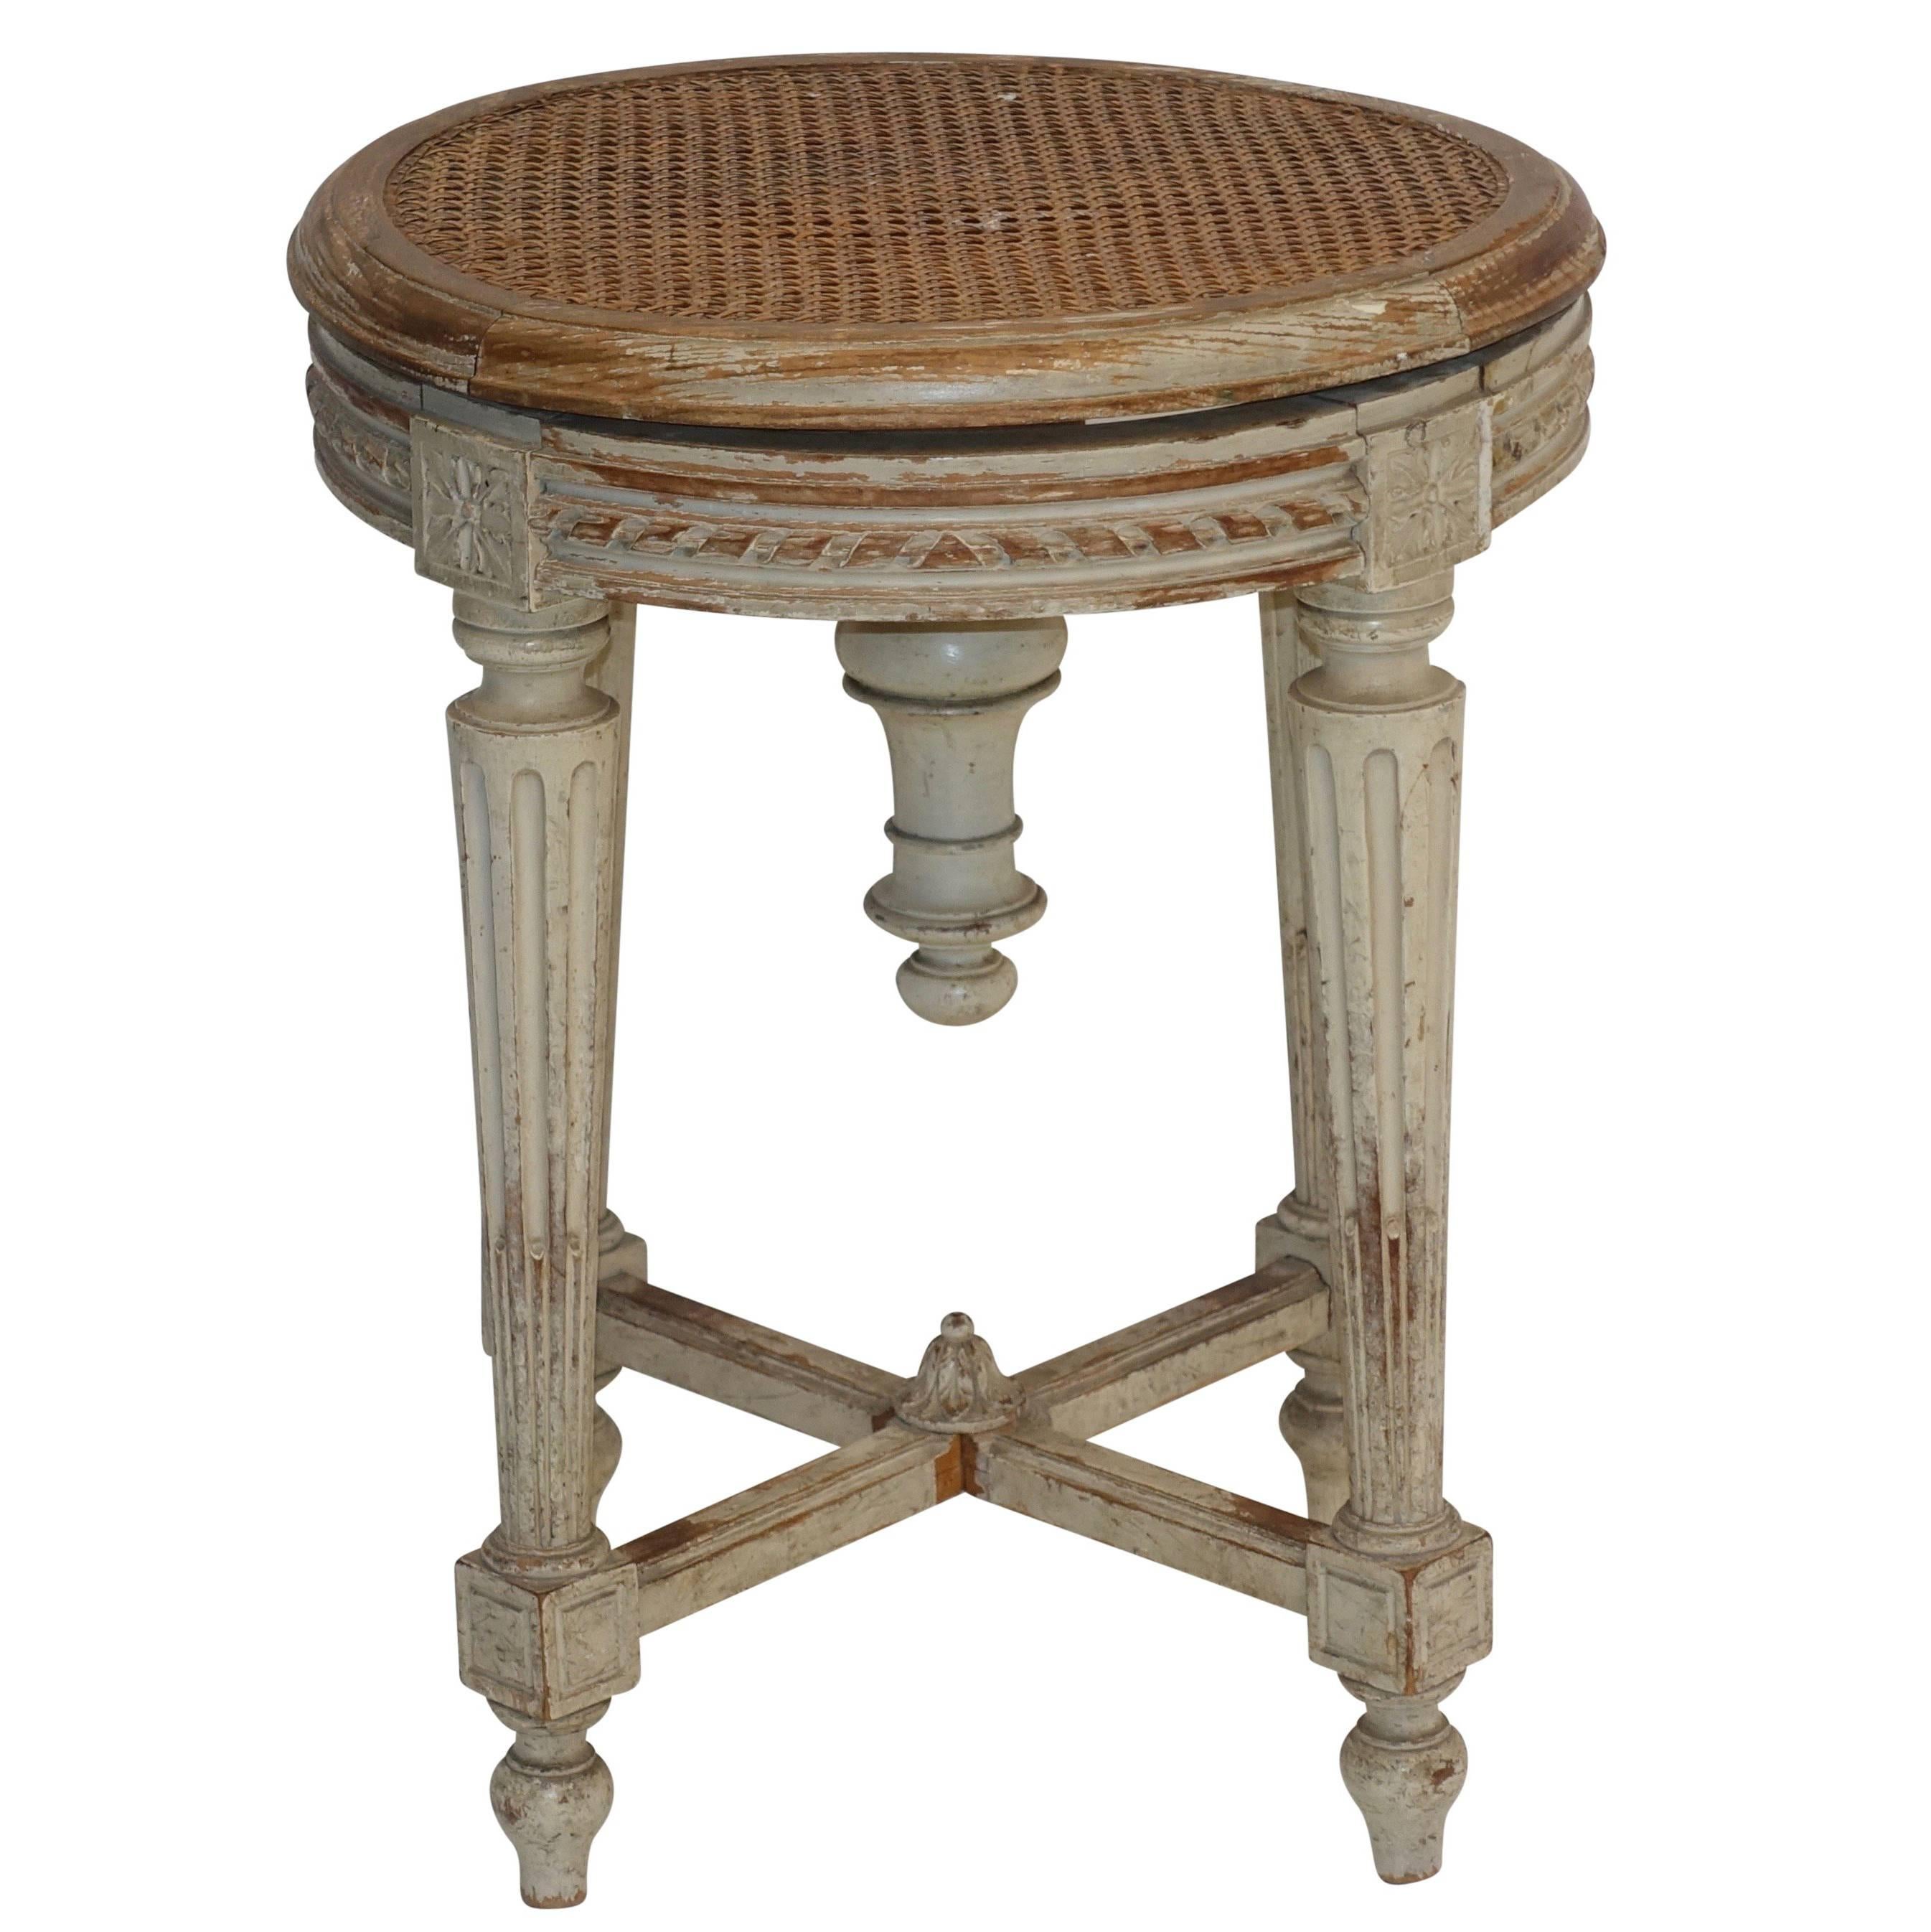 Louis XVI Piano Stool with Caned Seat, French, circa 1880